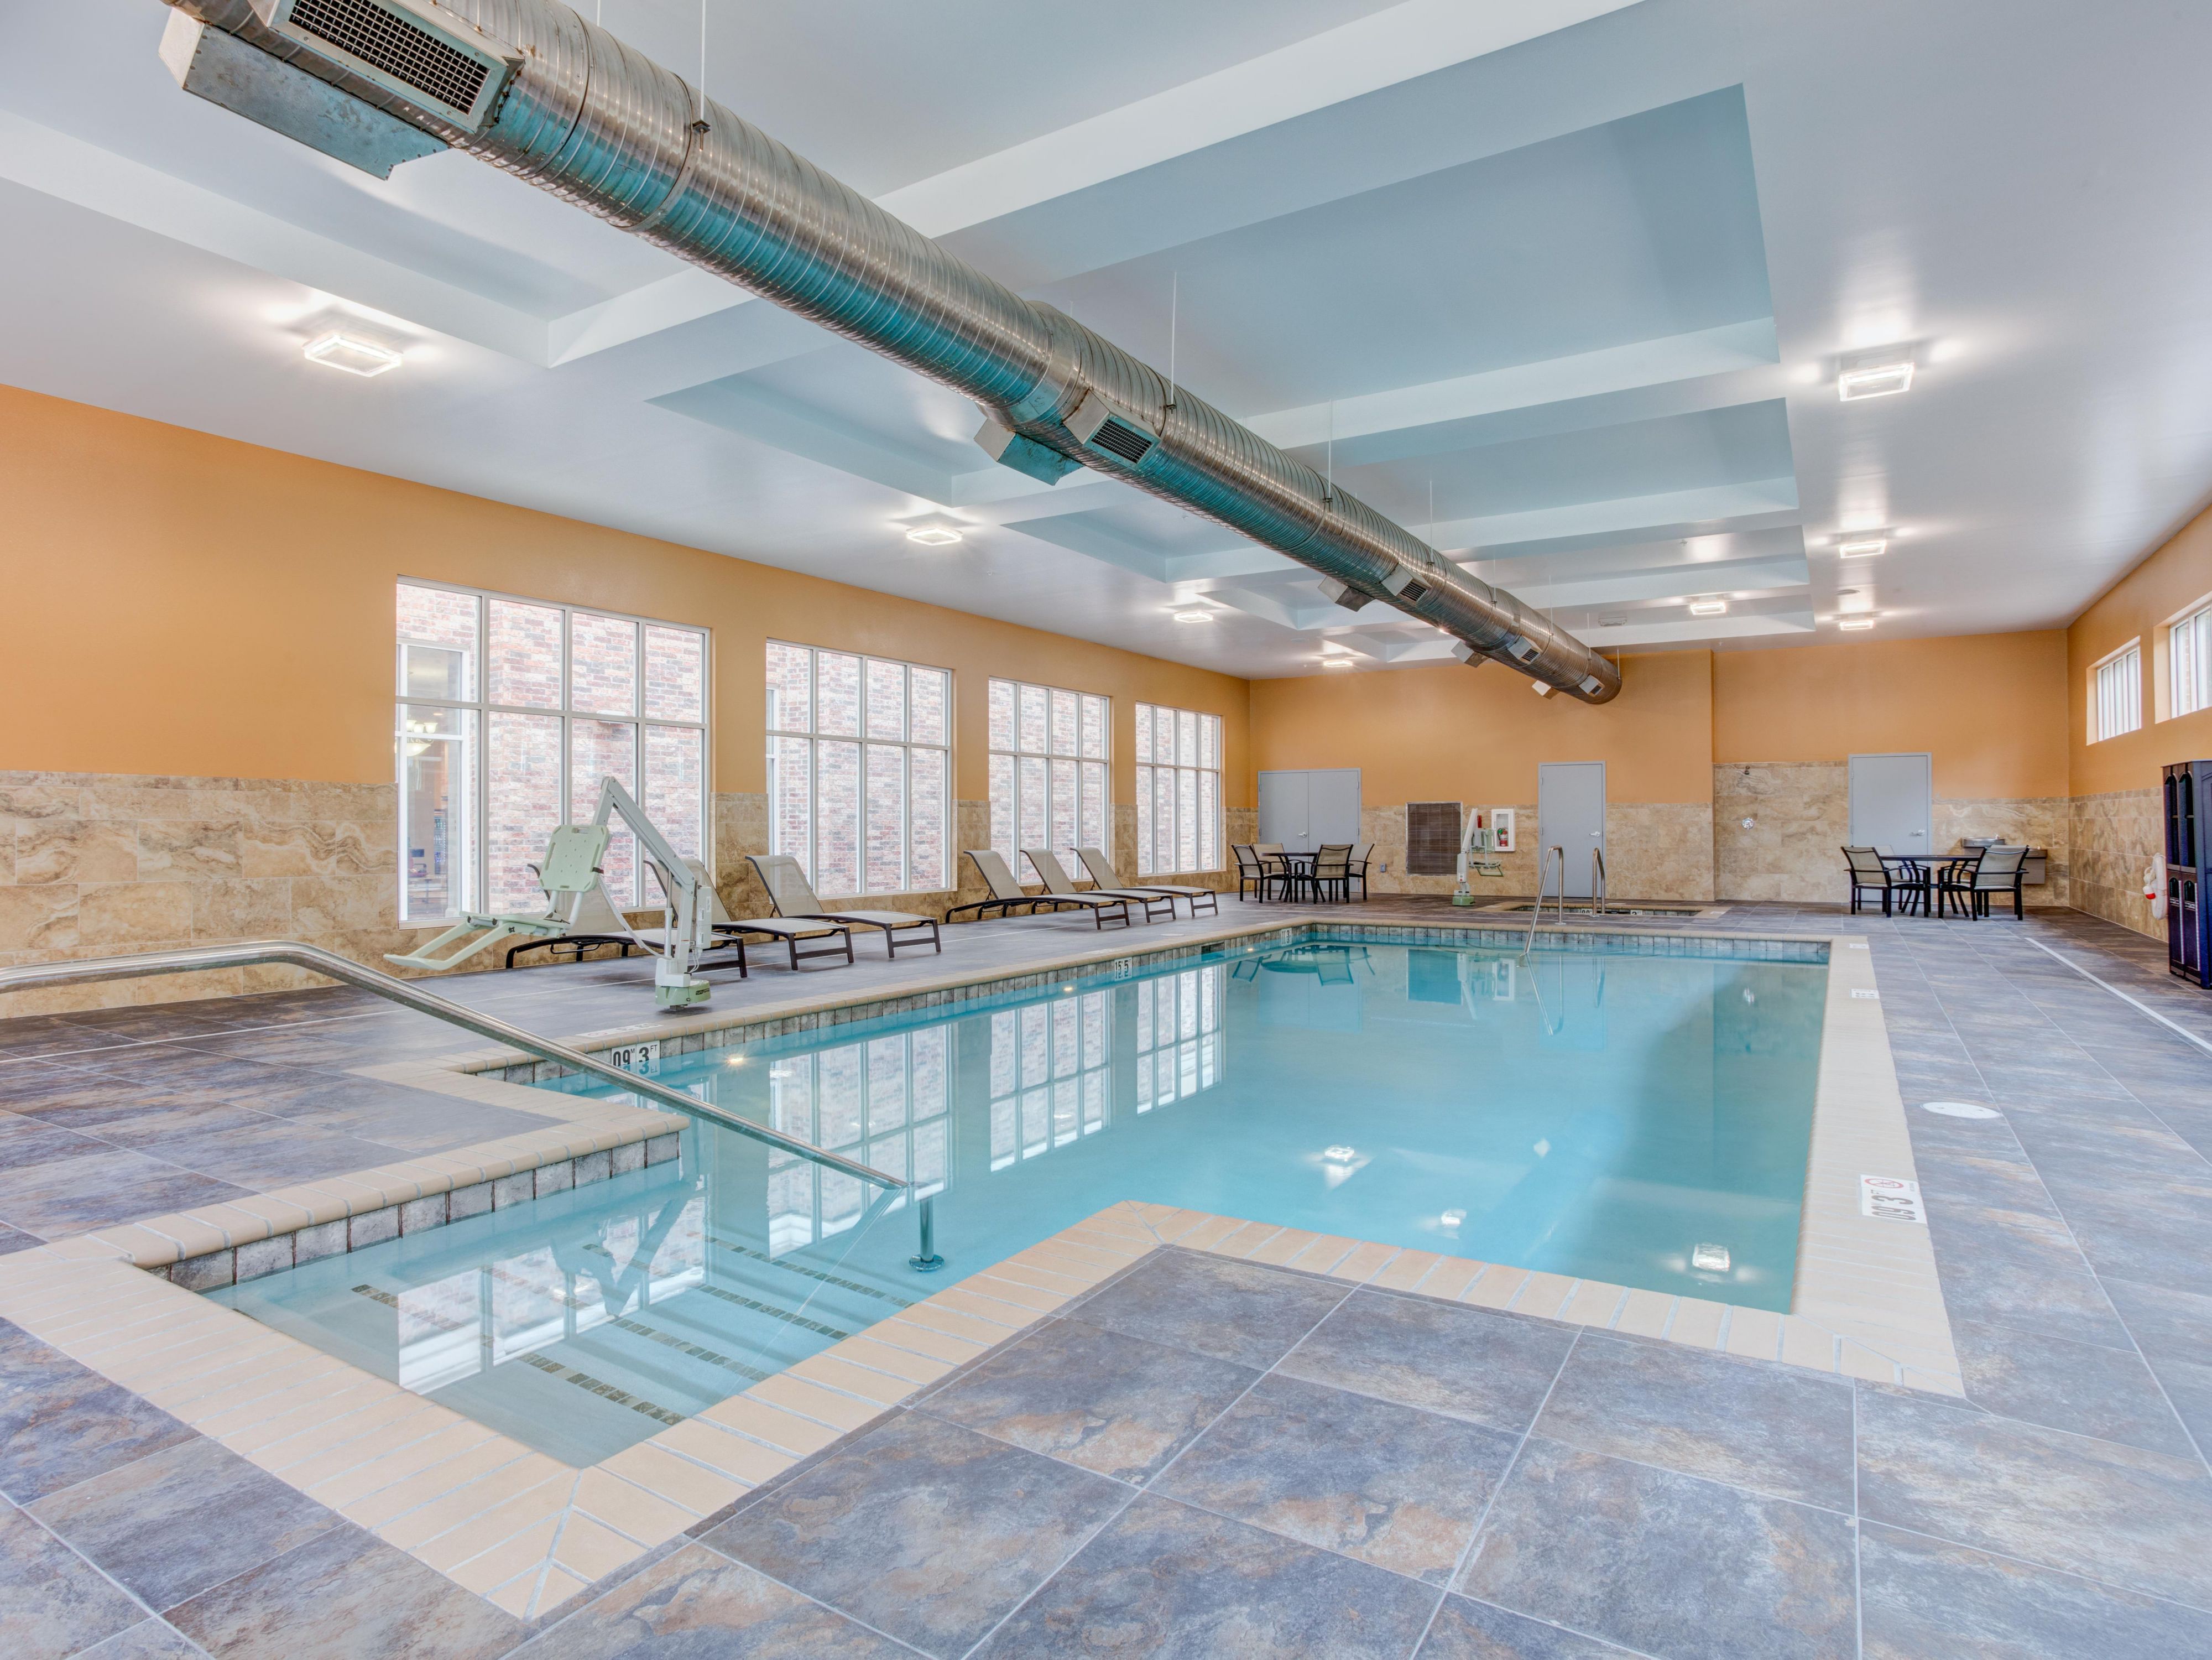 The hotel features an indoor heated pool and Jacuzzi. Open year round!